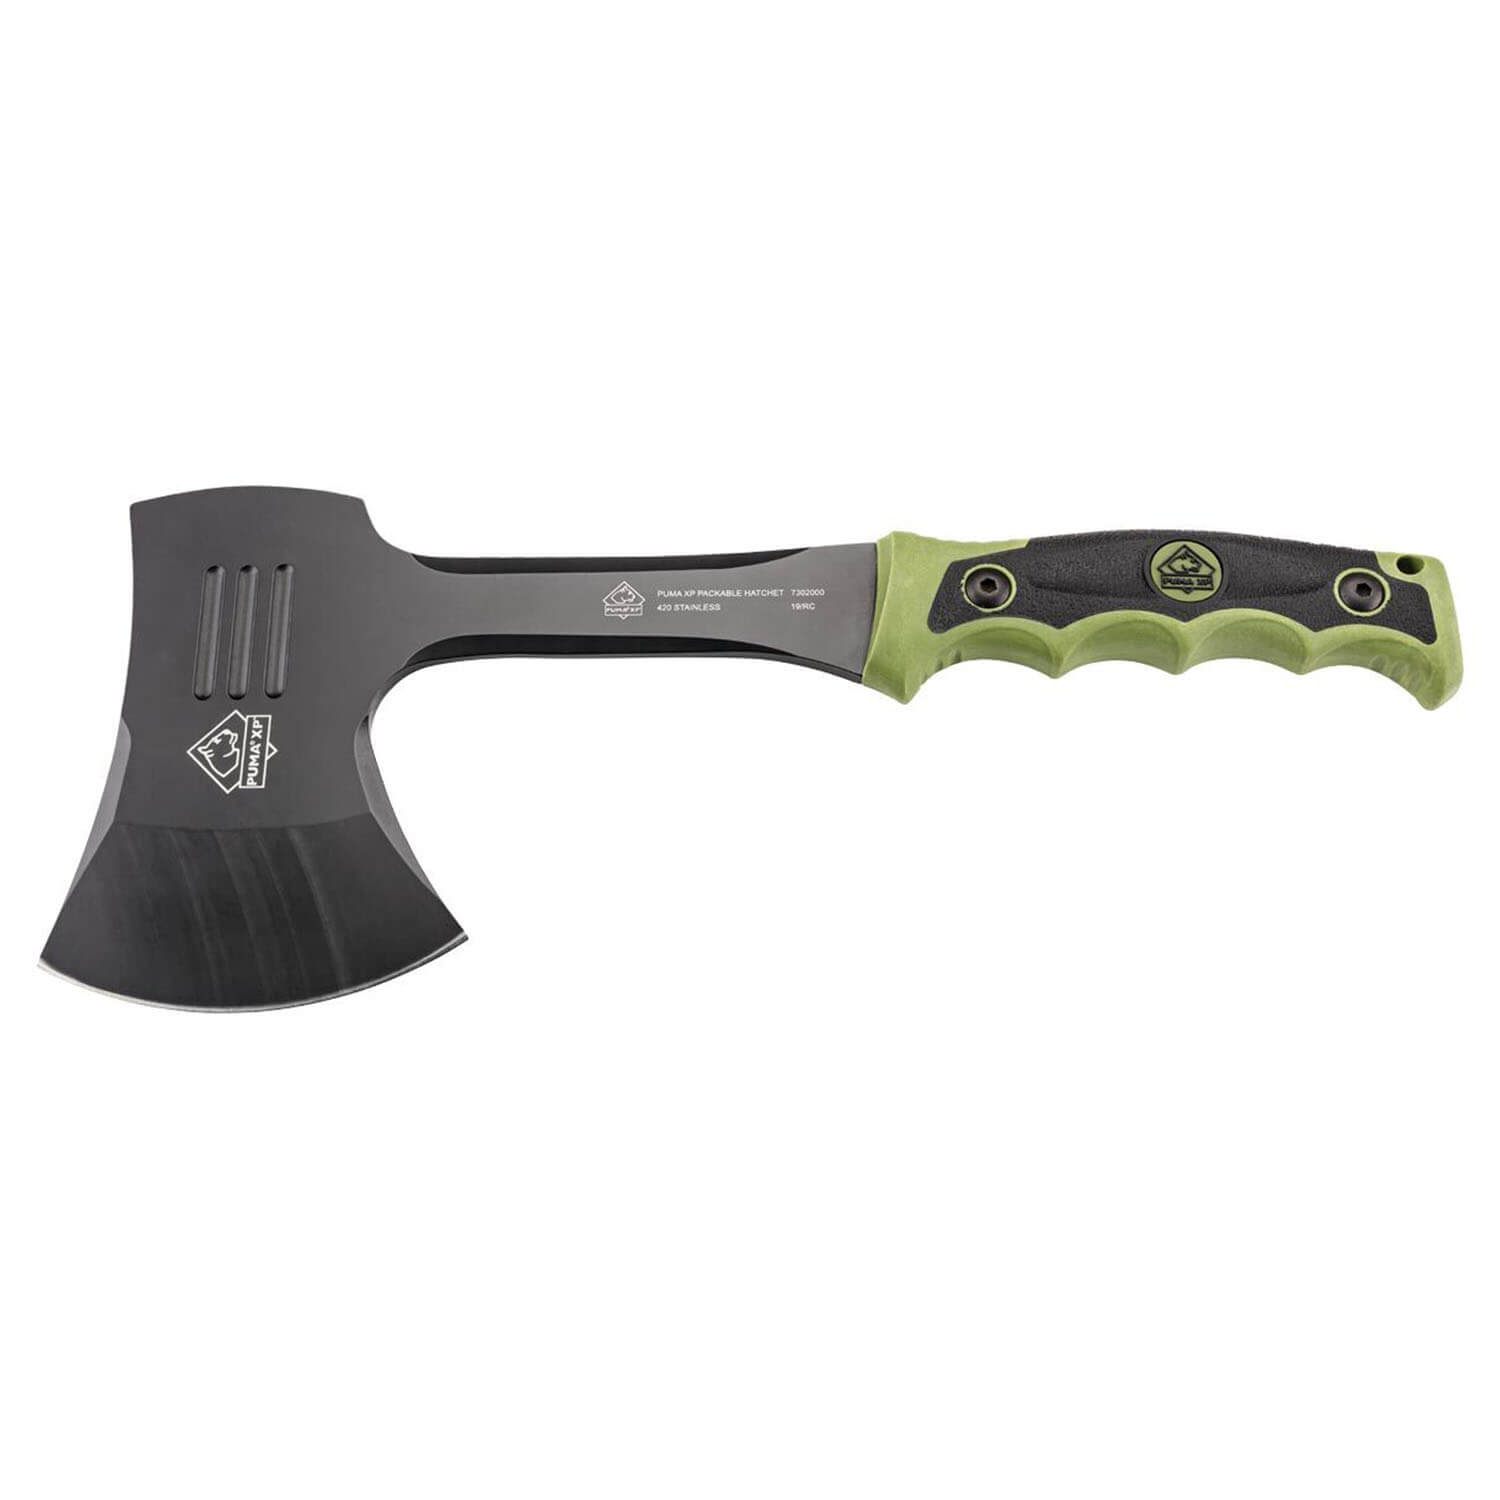 Puma outdooraxe packable hatchet -  Hunting Ground Work Tools